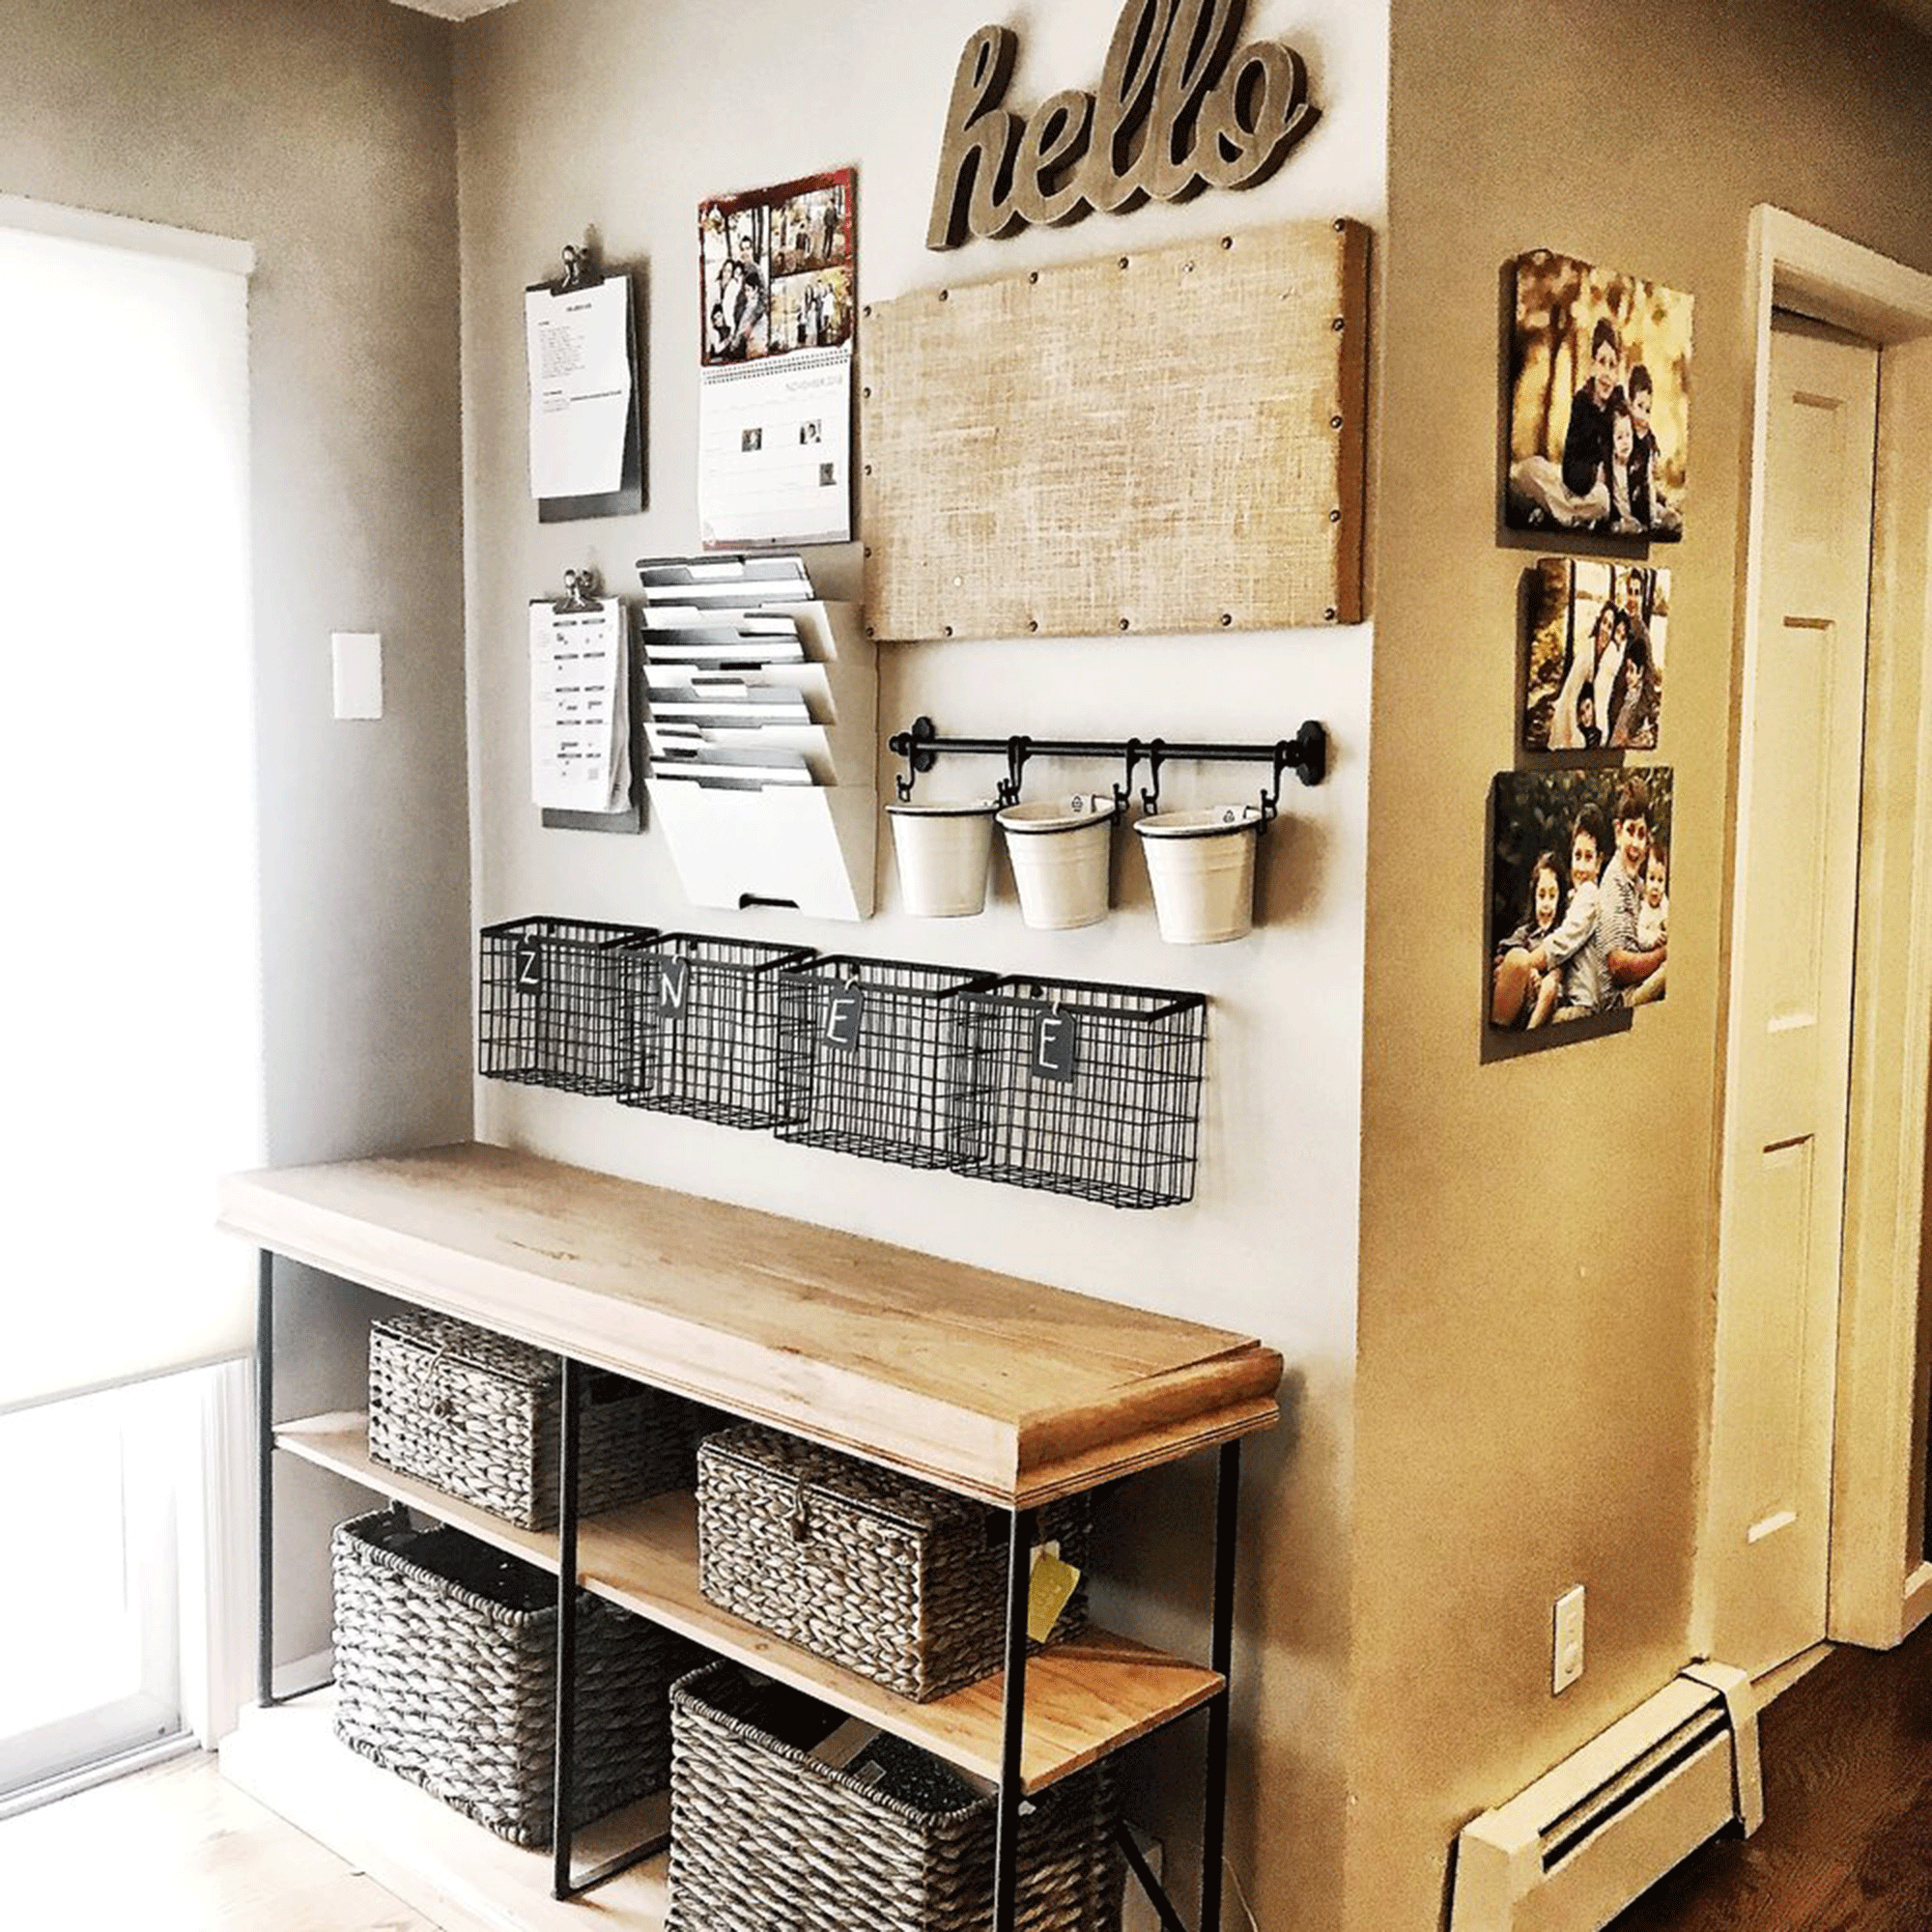 Magnolia wall with cork board and bench